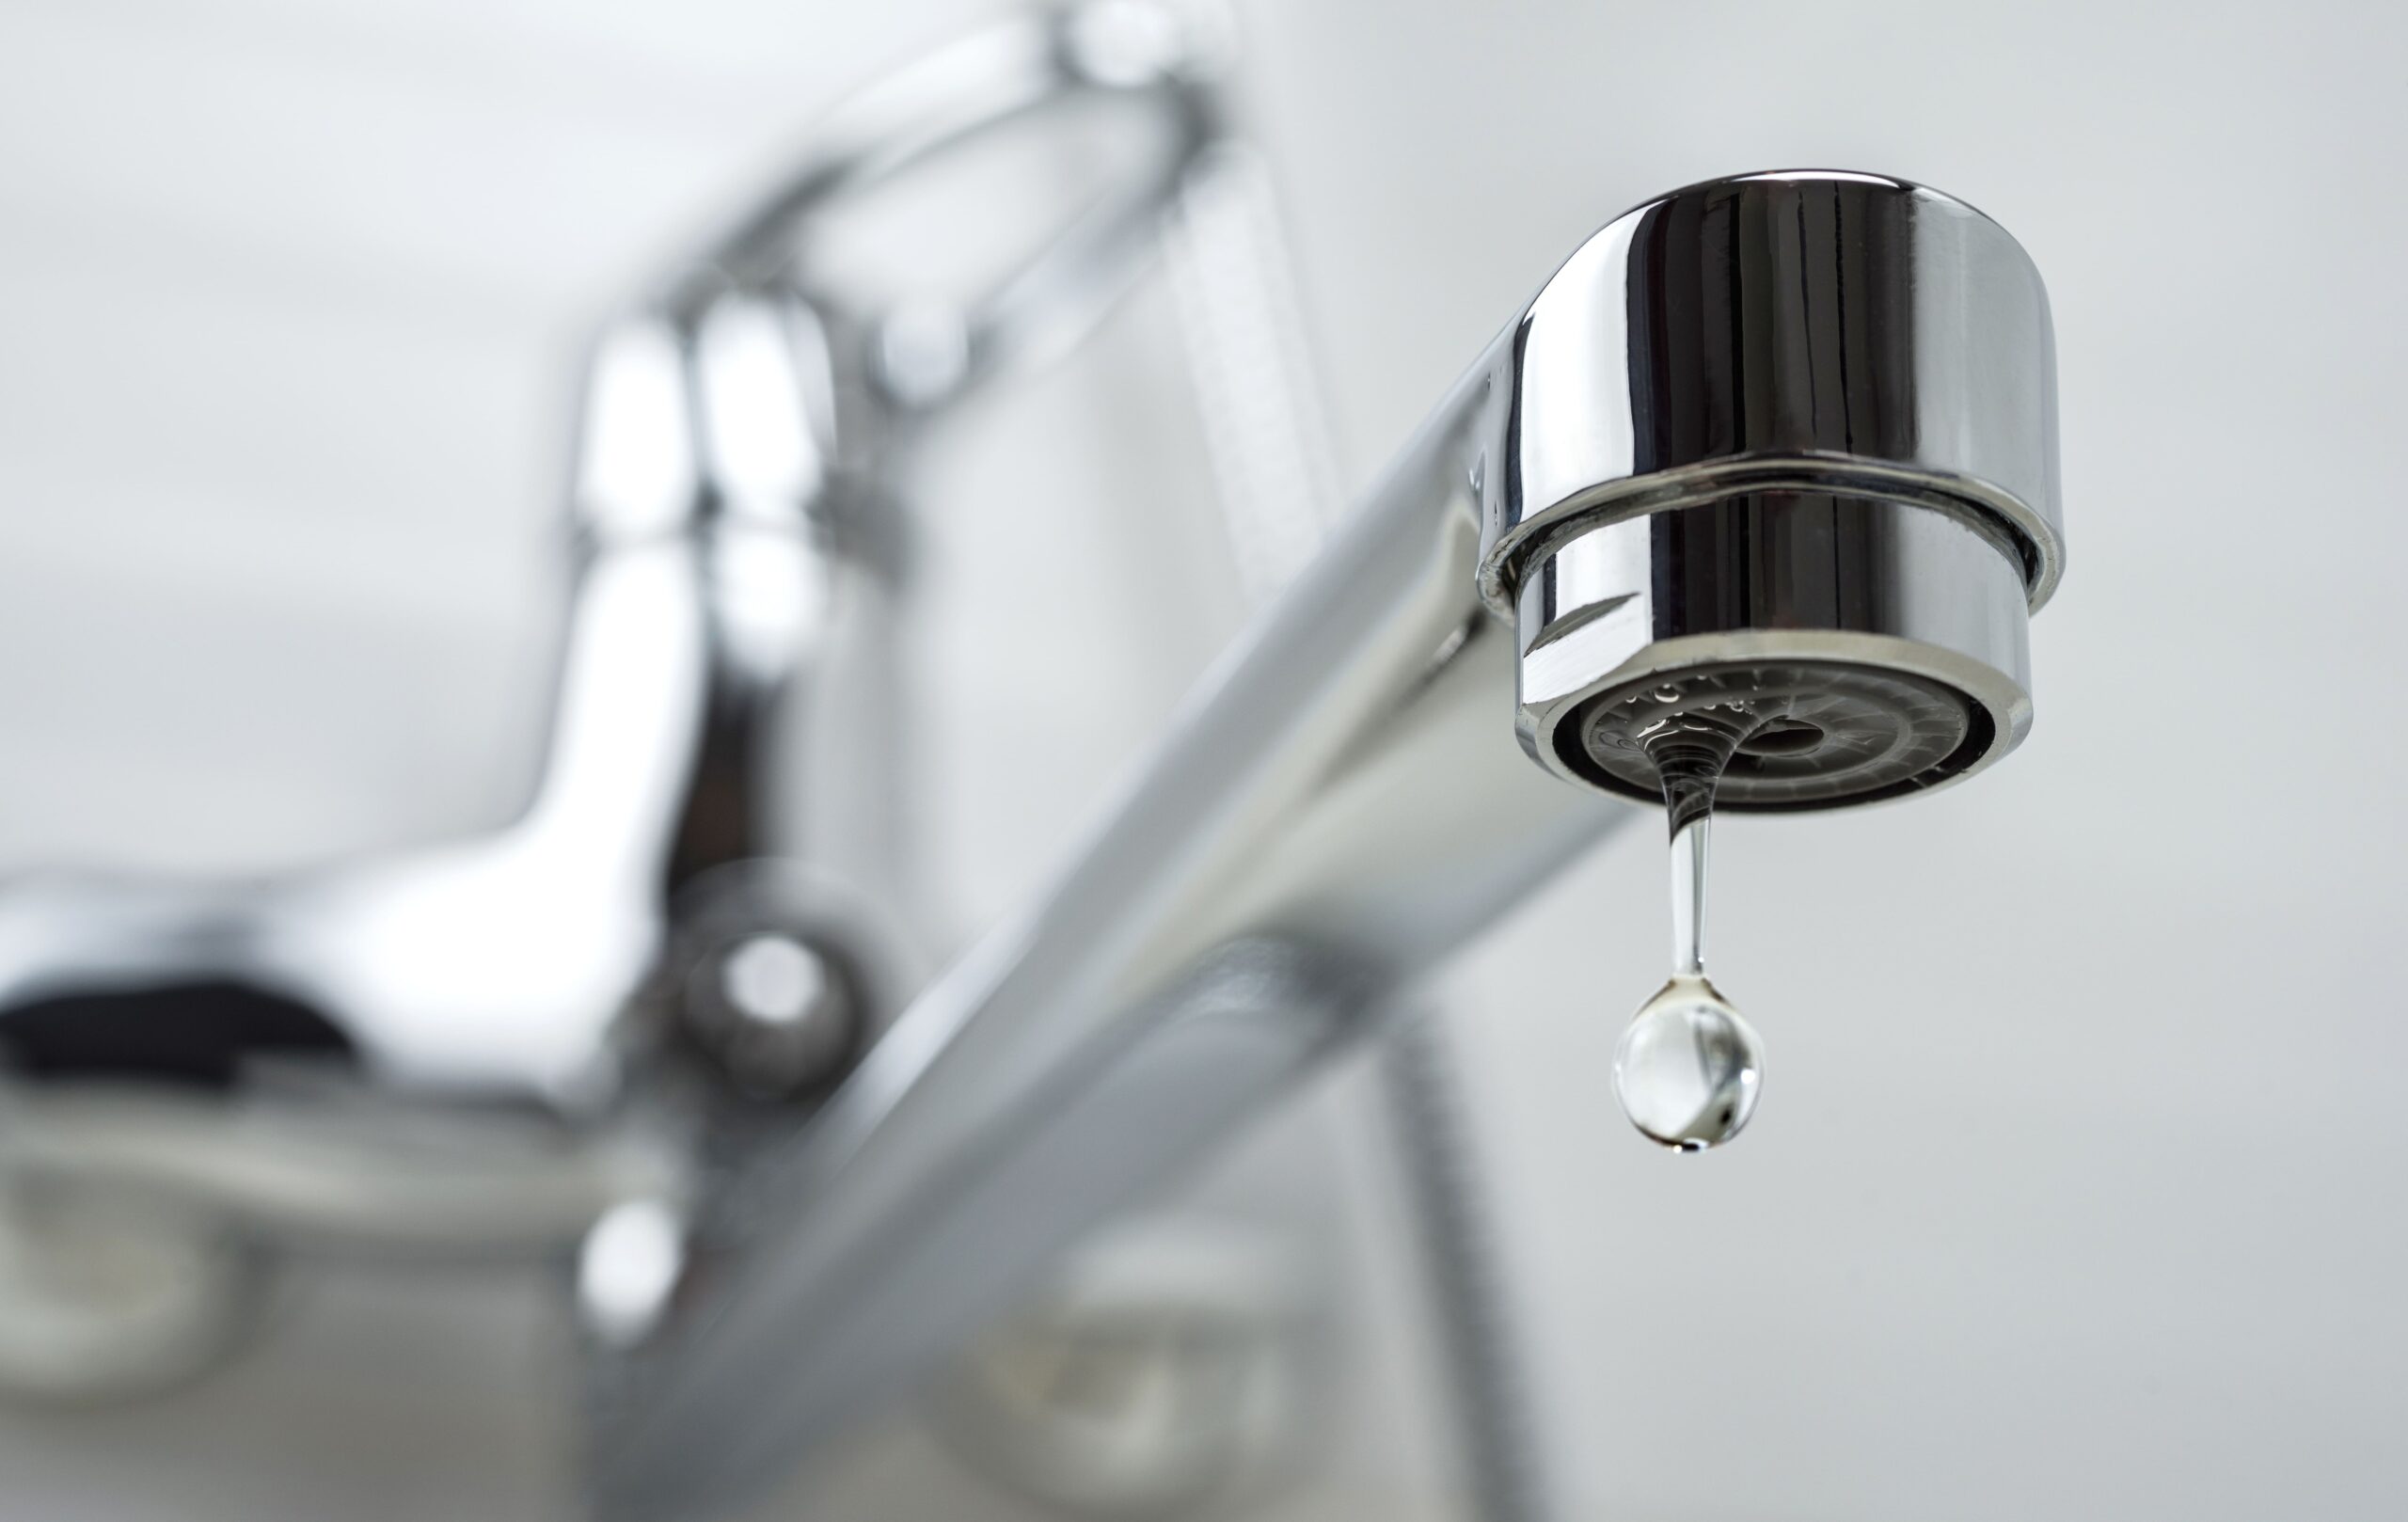 Don’t let the taps run dry in your community housing scheme